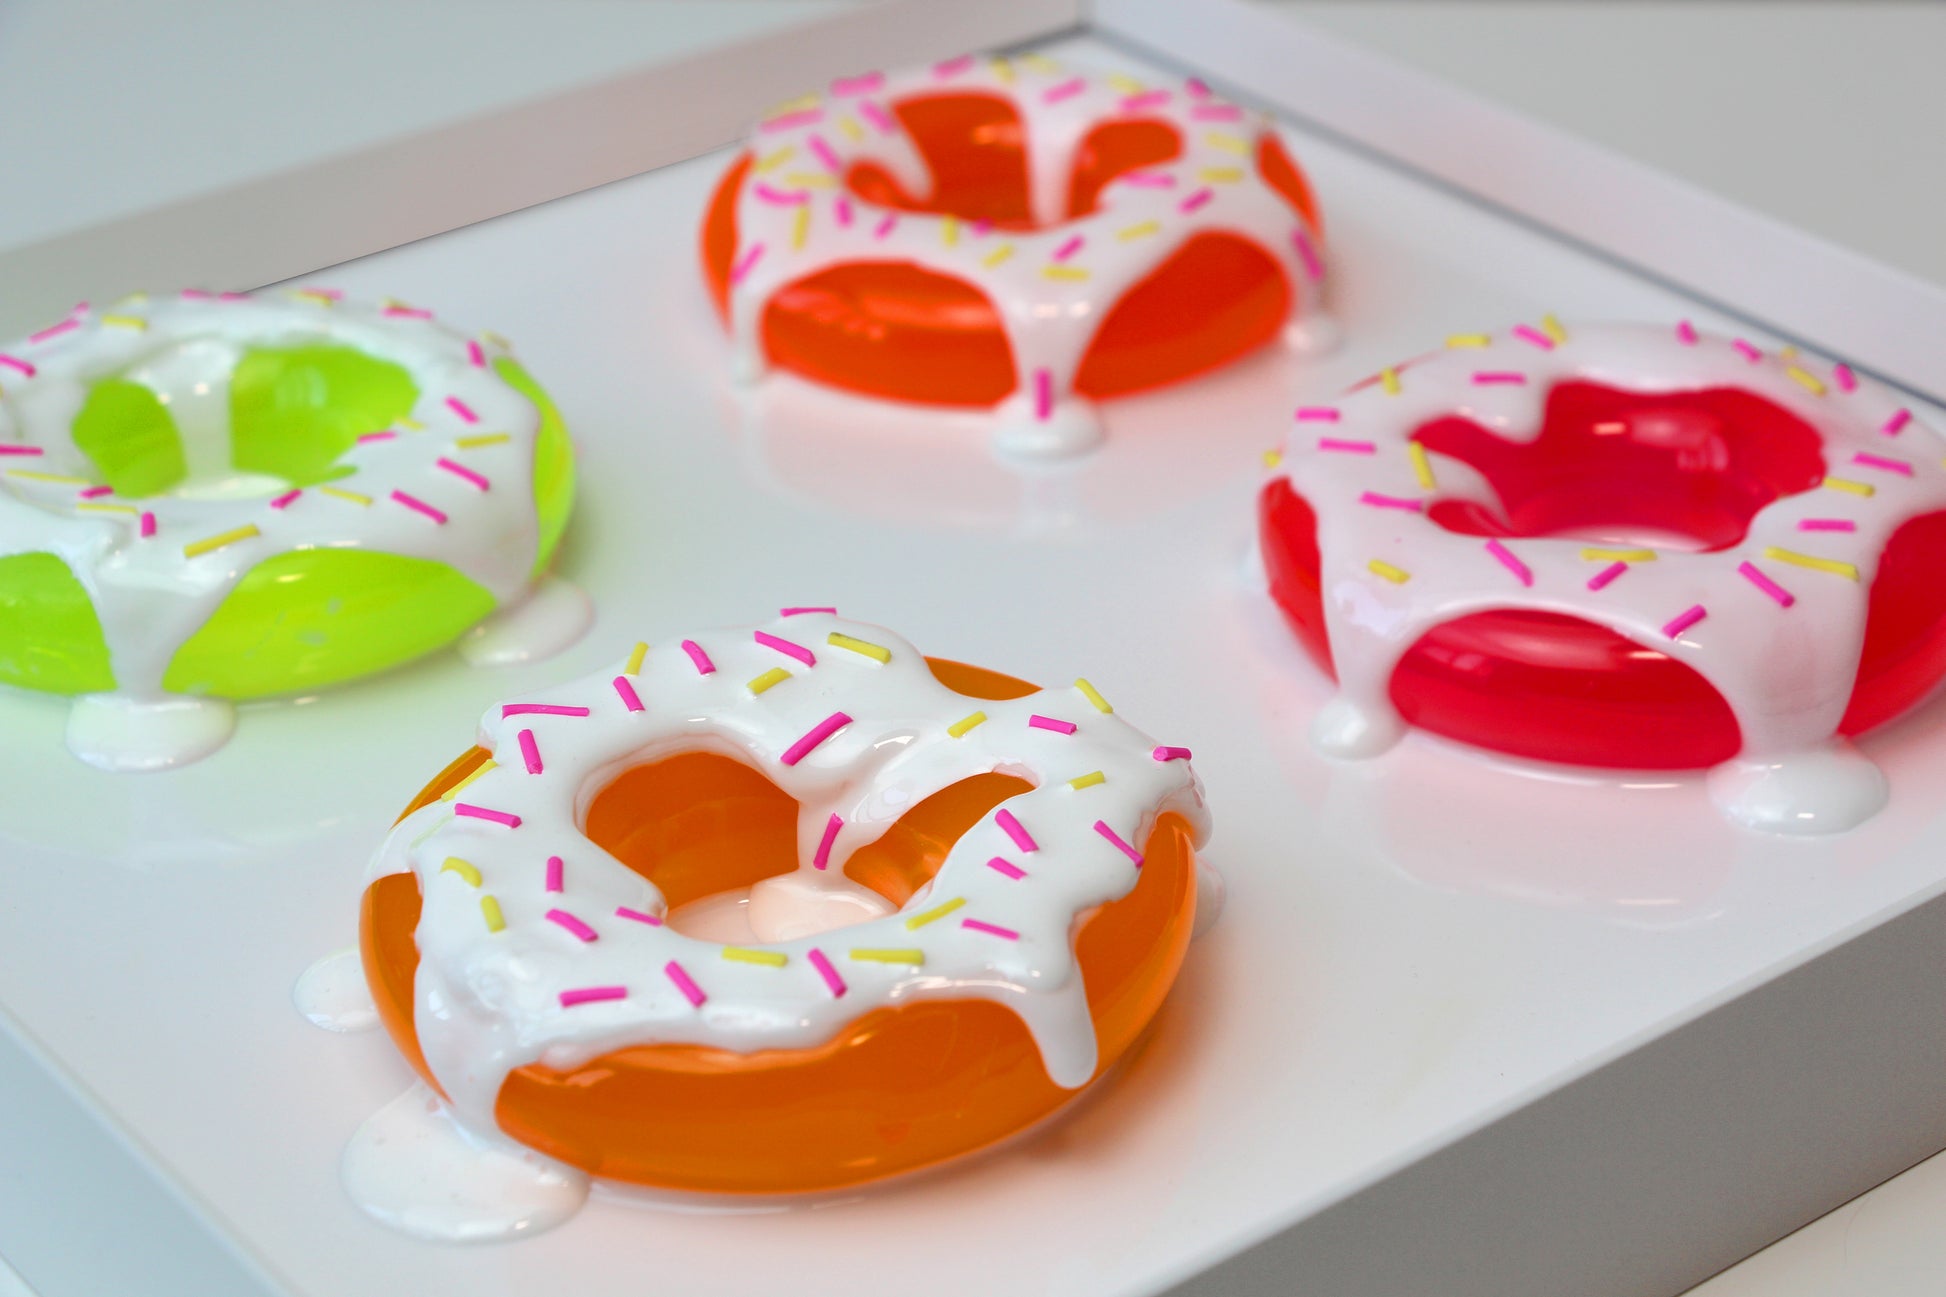 Neon Color Donuts Wall Hanging Pop Art - Talush Art Neon Color Donuts Wall Hanging Pop Art